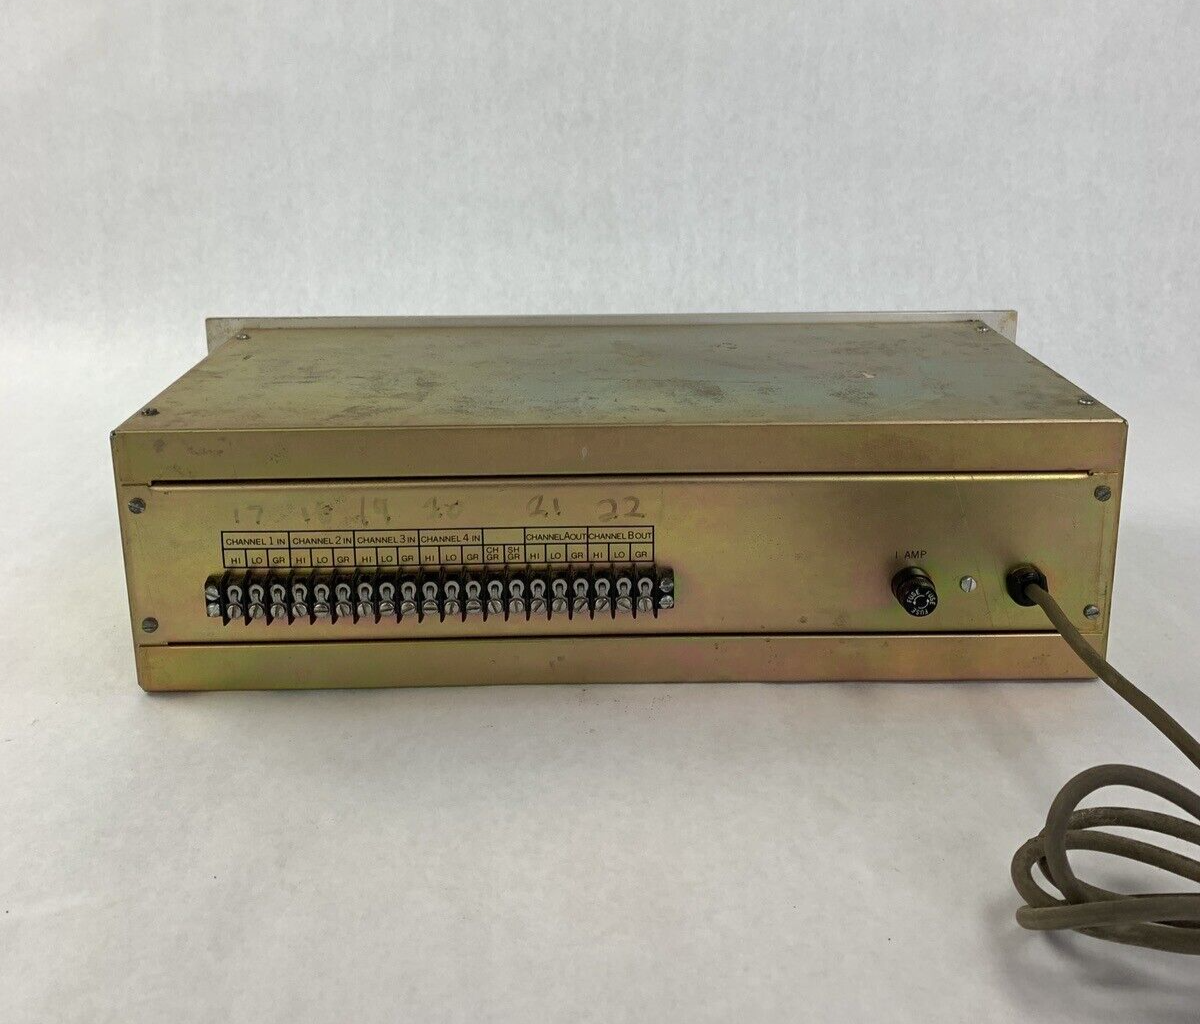 Electro Voice 7445 Stereo-4 Encoder Parts and Repair